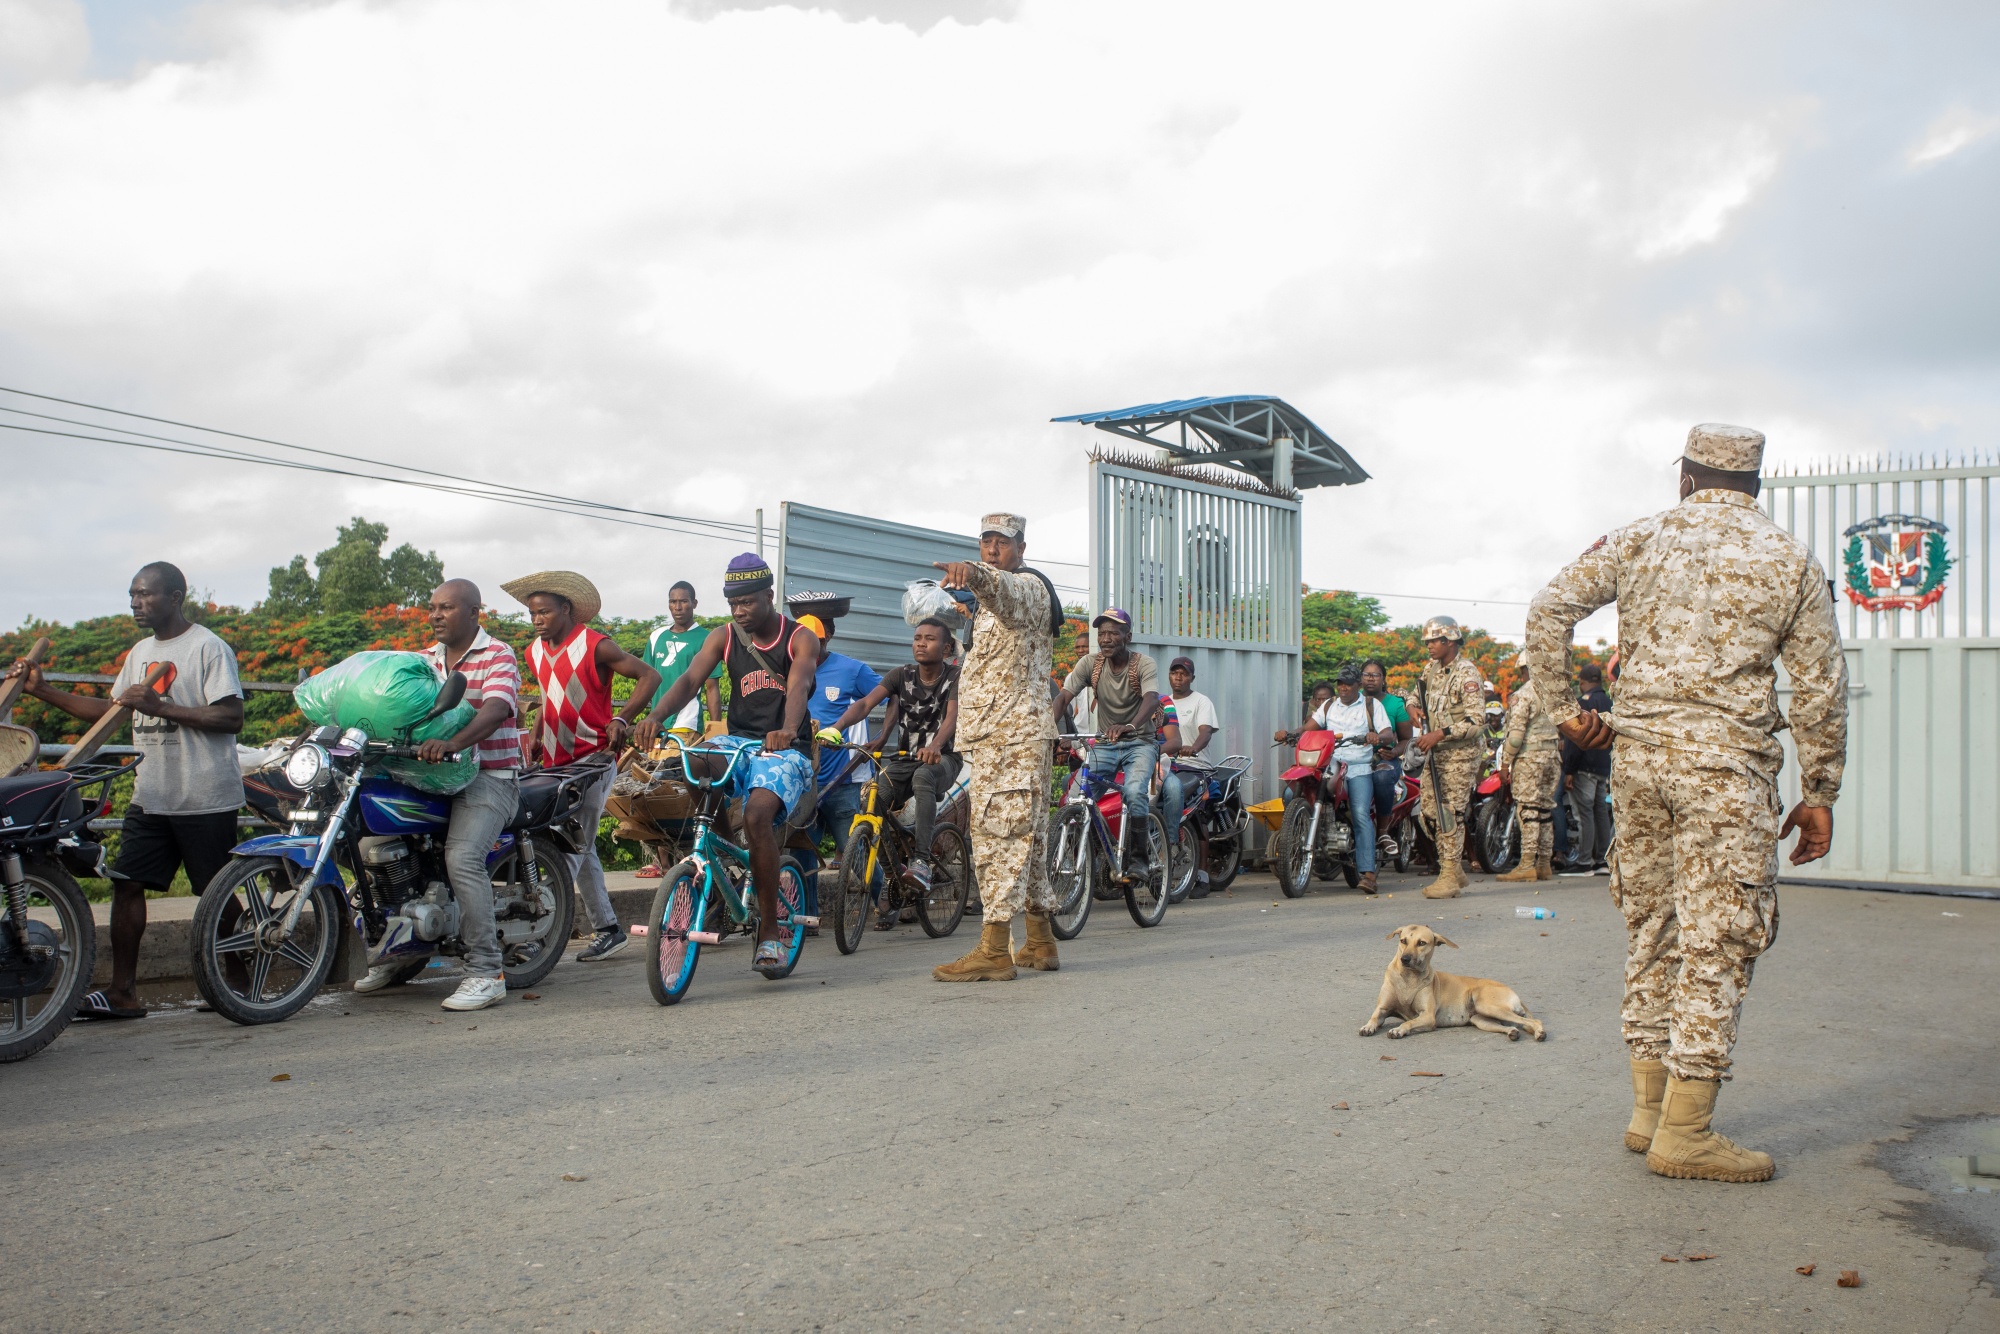 Members of the Specialized Border Security Corps direct pedestrians arriving from Haiti at the Dominican Republic. The Dominican Republic is building a barrier to insulate one of the region’s most successful economies from chaos in Haiti.